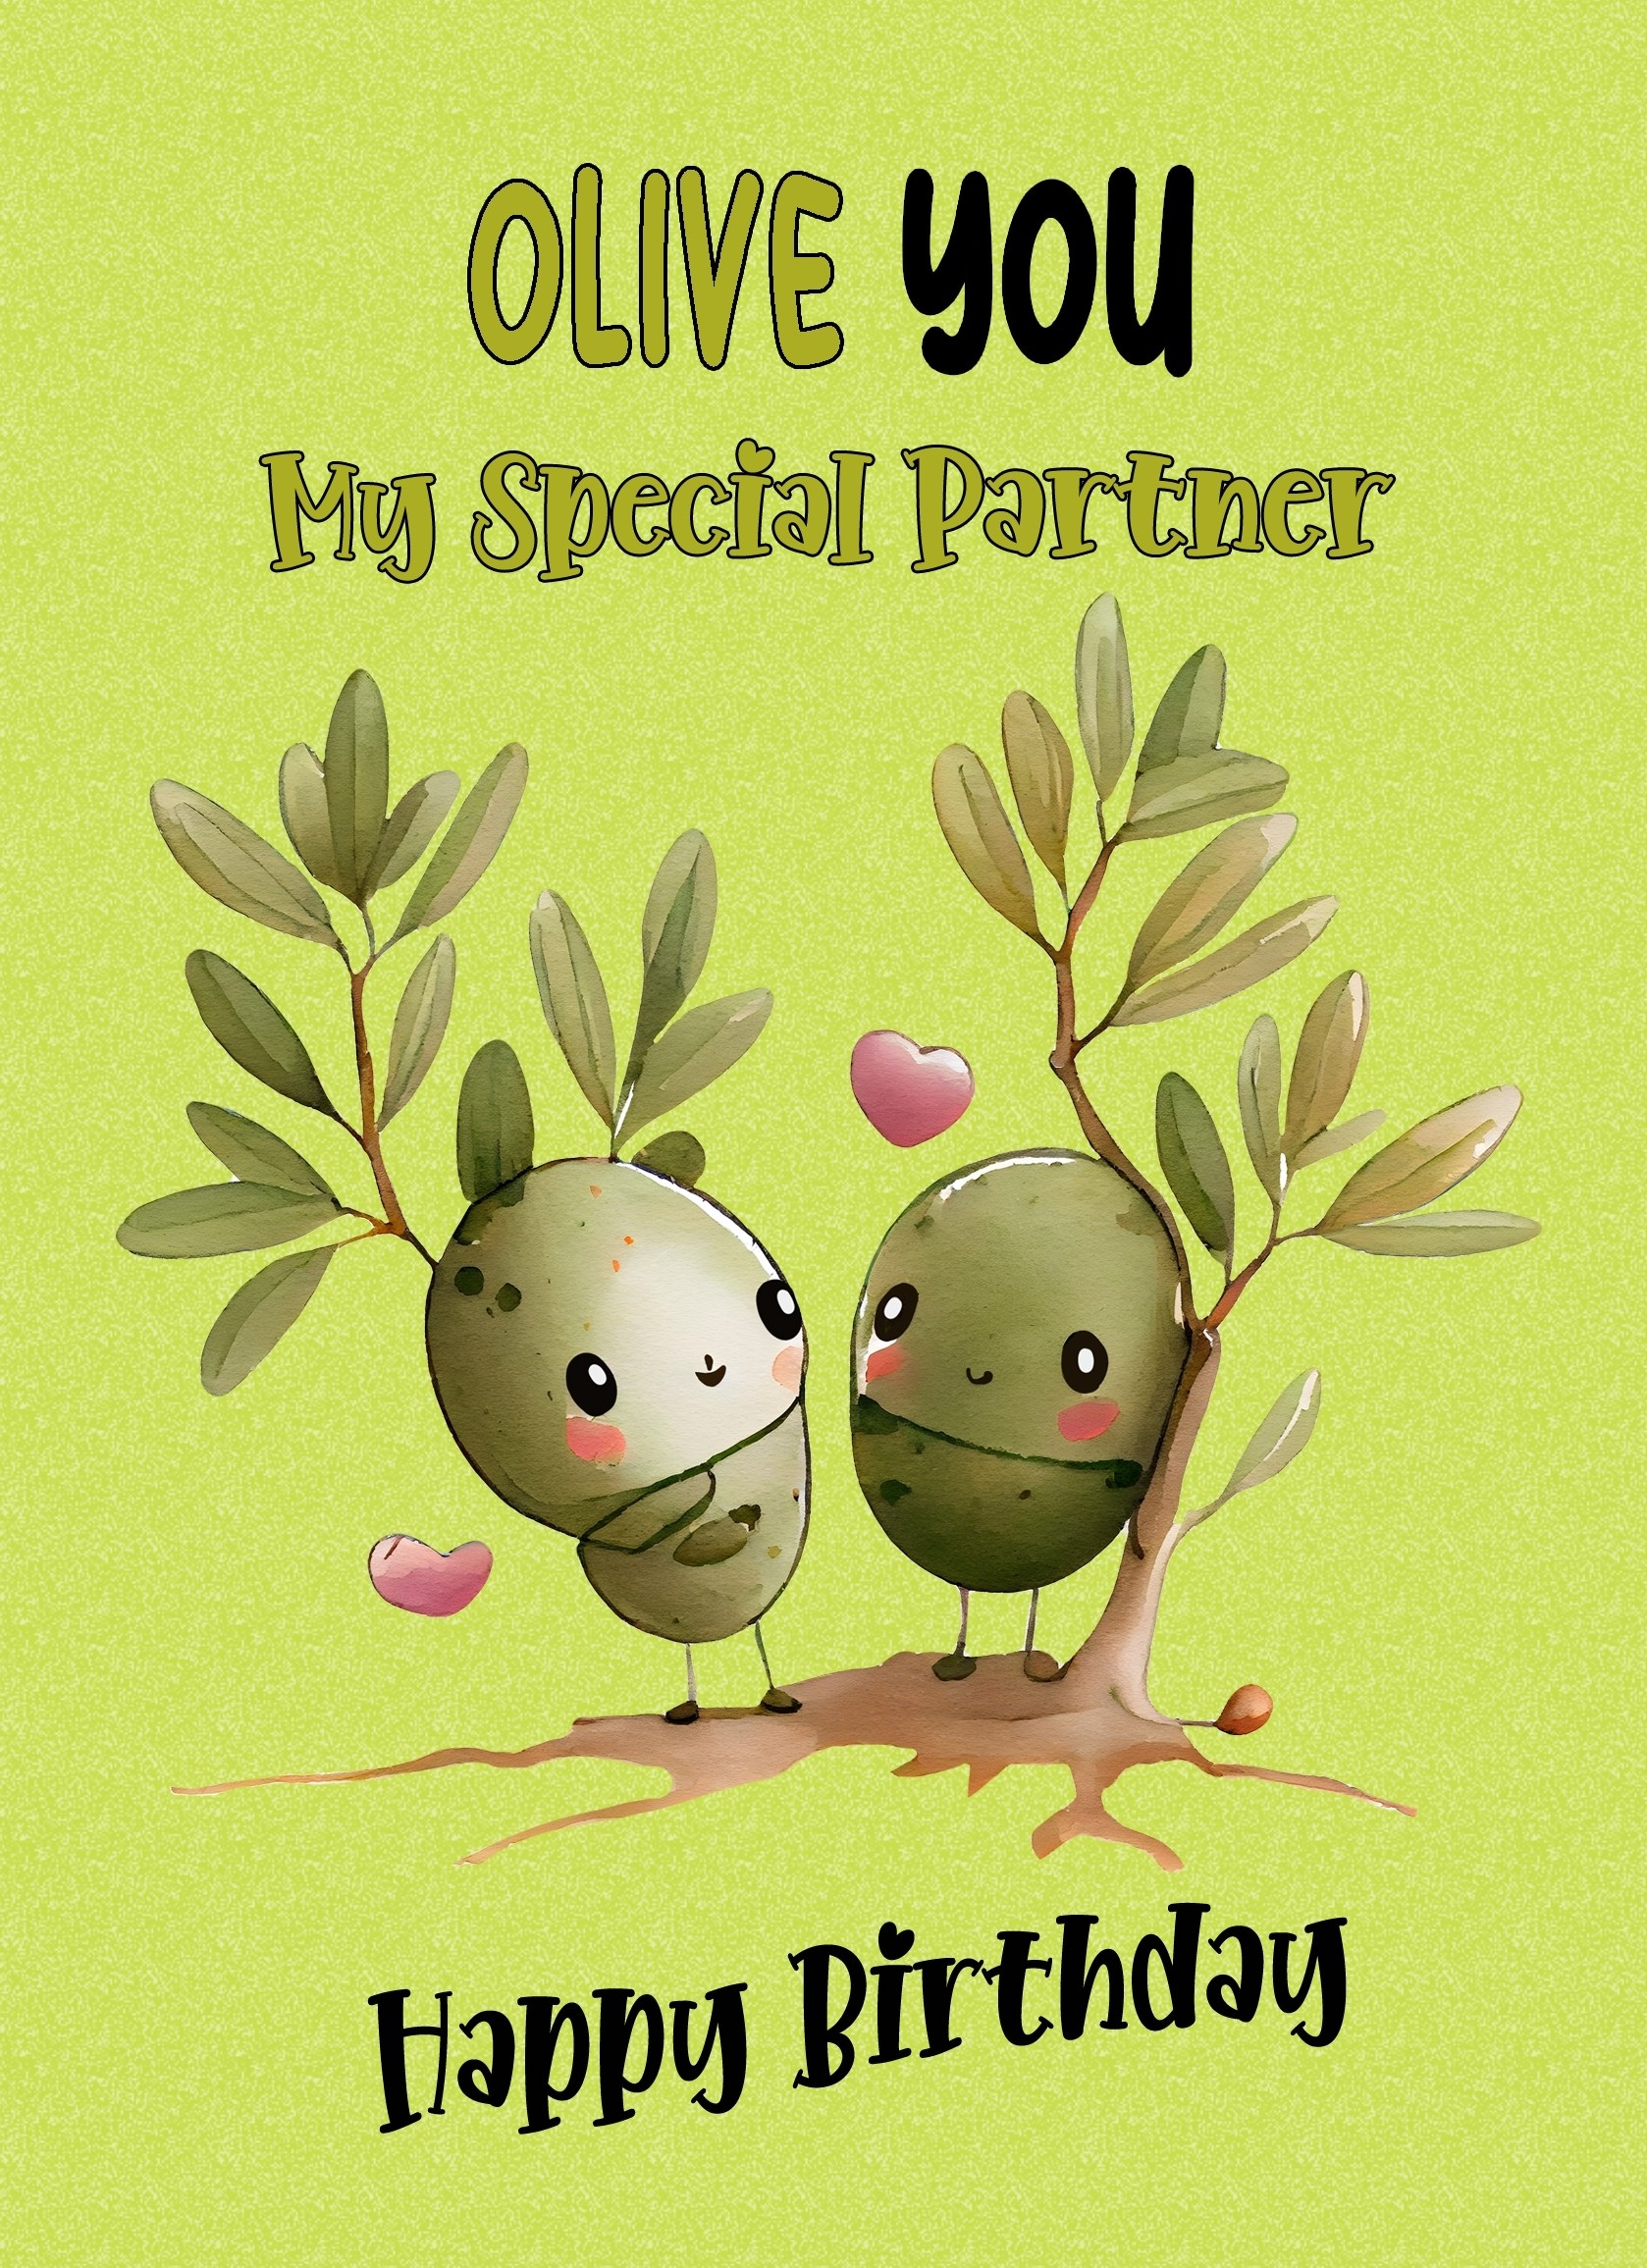 Funny Pun Romantic Birthday Card for Partner (Olive You)